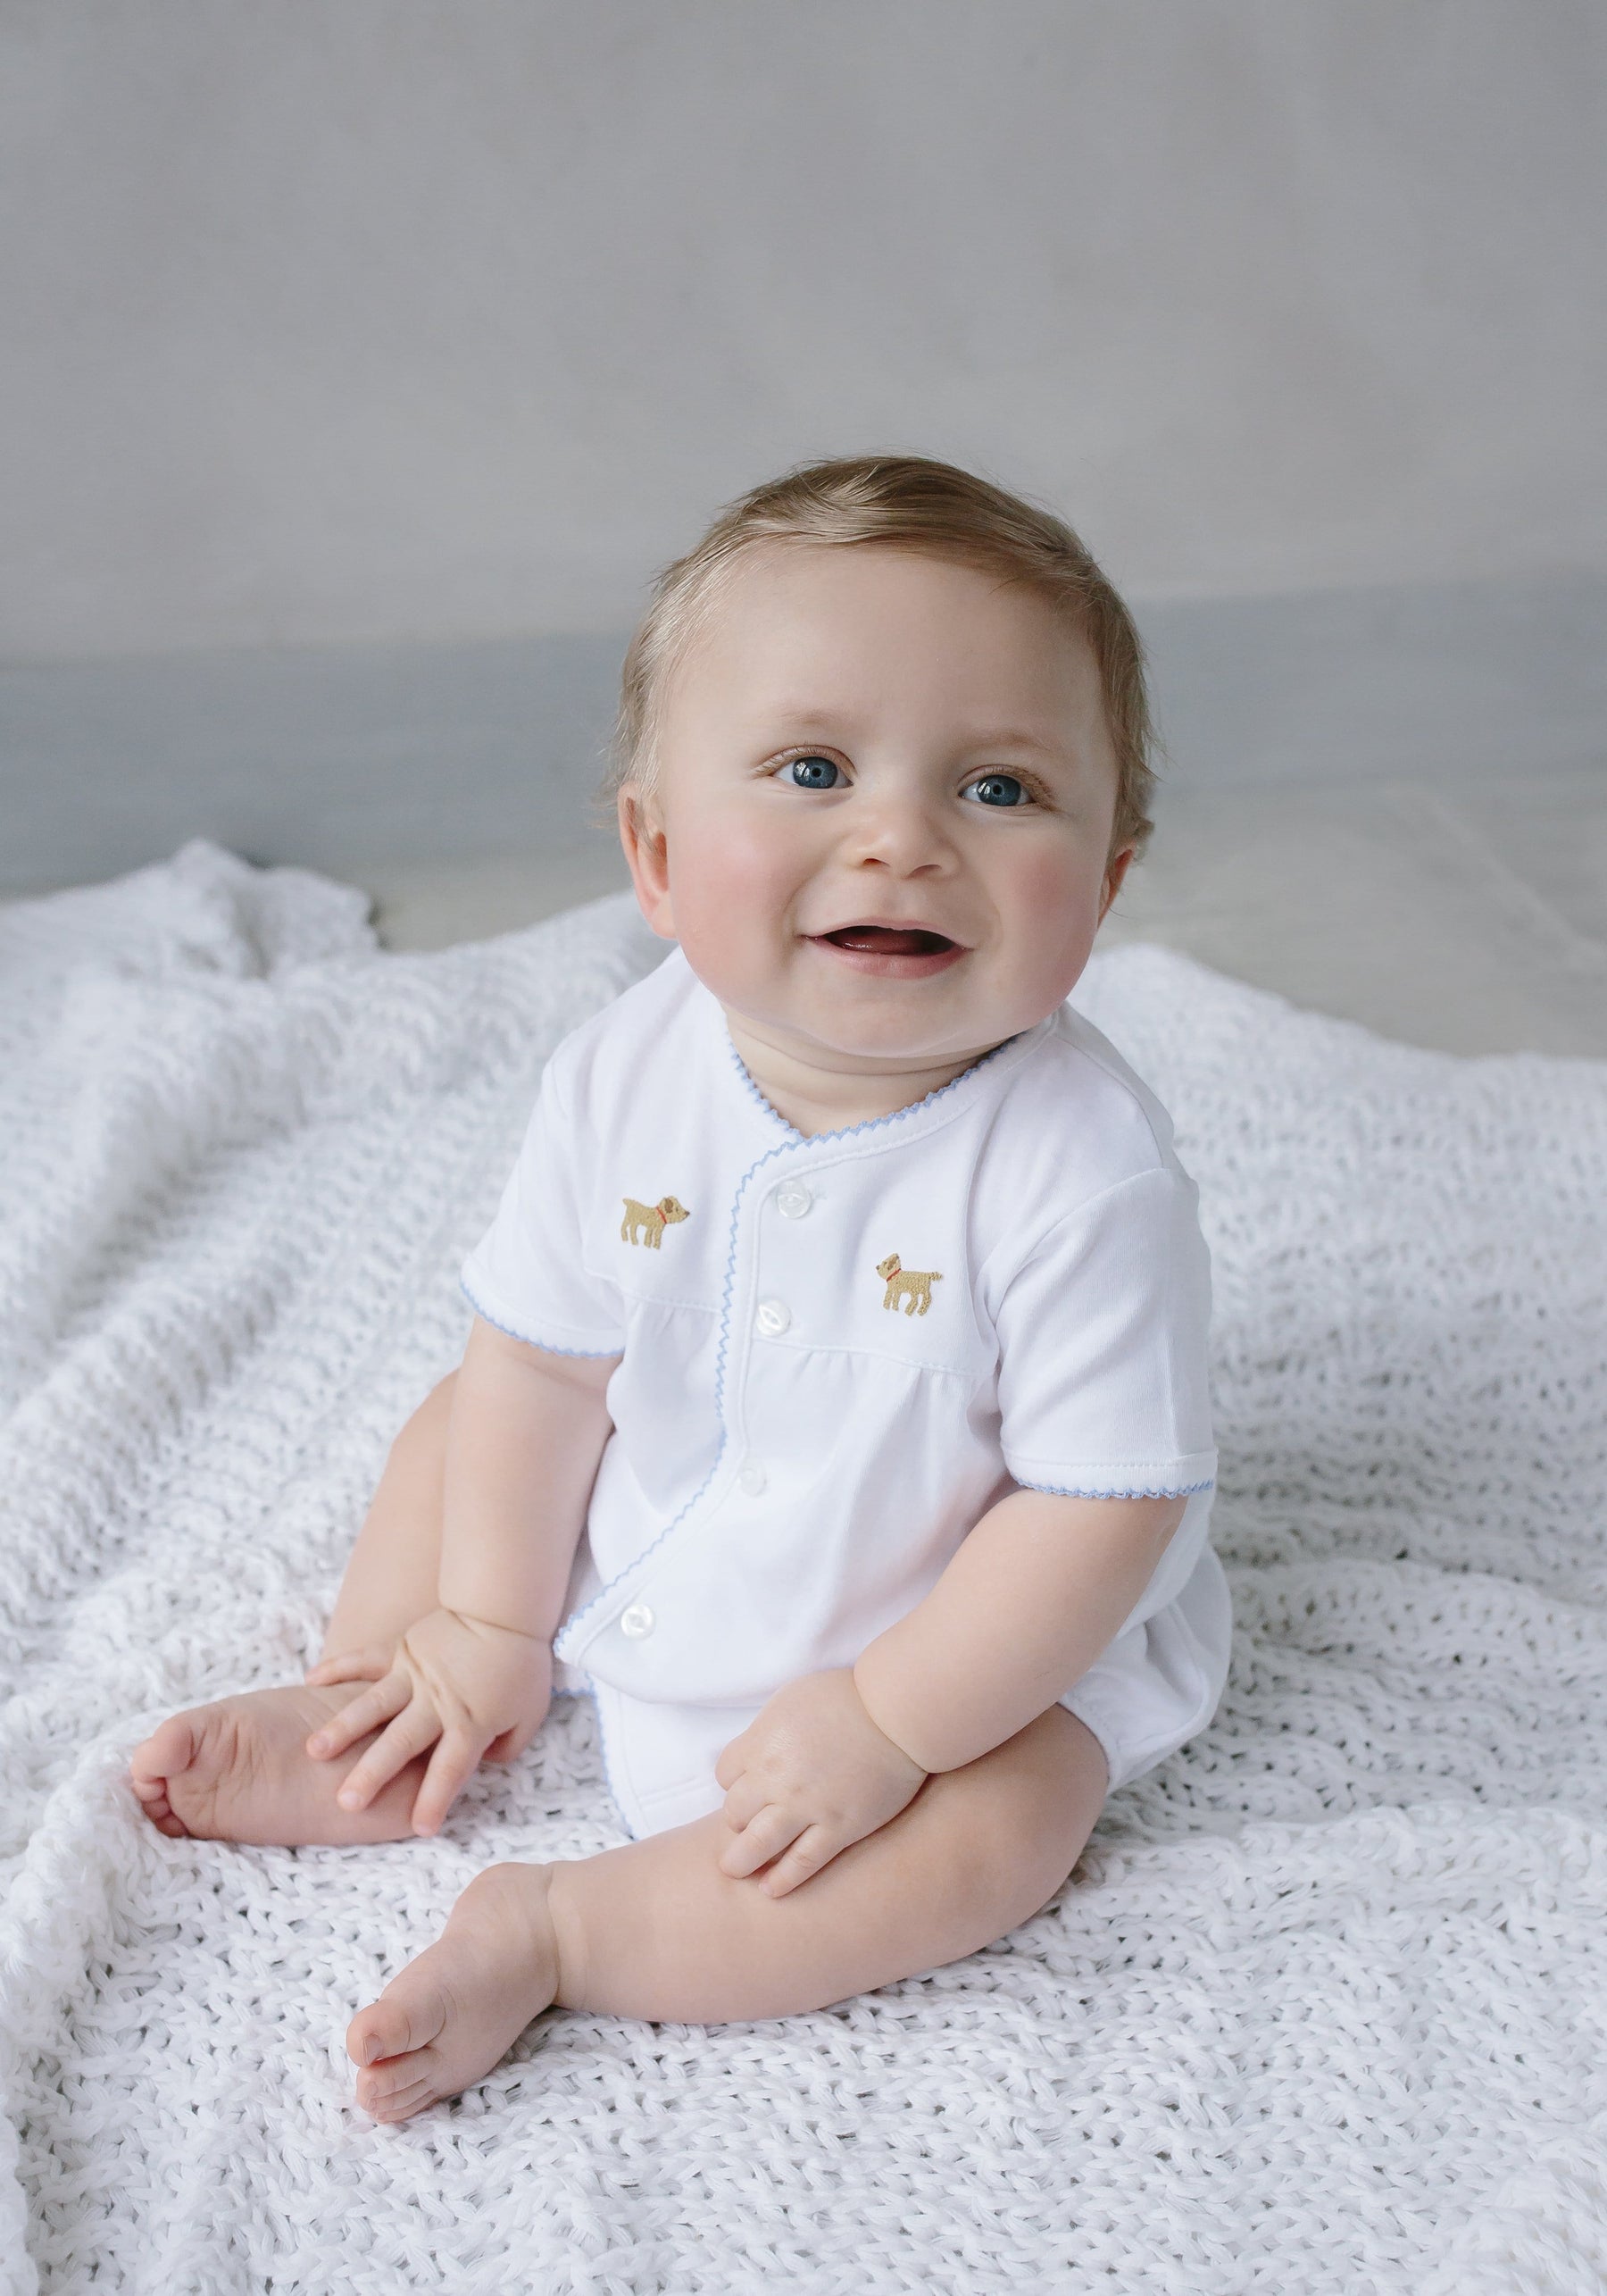 Pinpoint Layette Knit Set-Lab, seguridadindustrialcr, classic children's clothing, preppy children's clothing, traditional children's clothing, classic baby clothing, traditional baby clothing